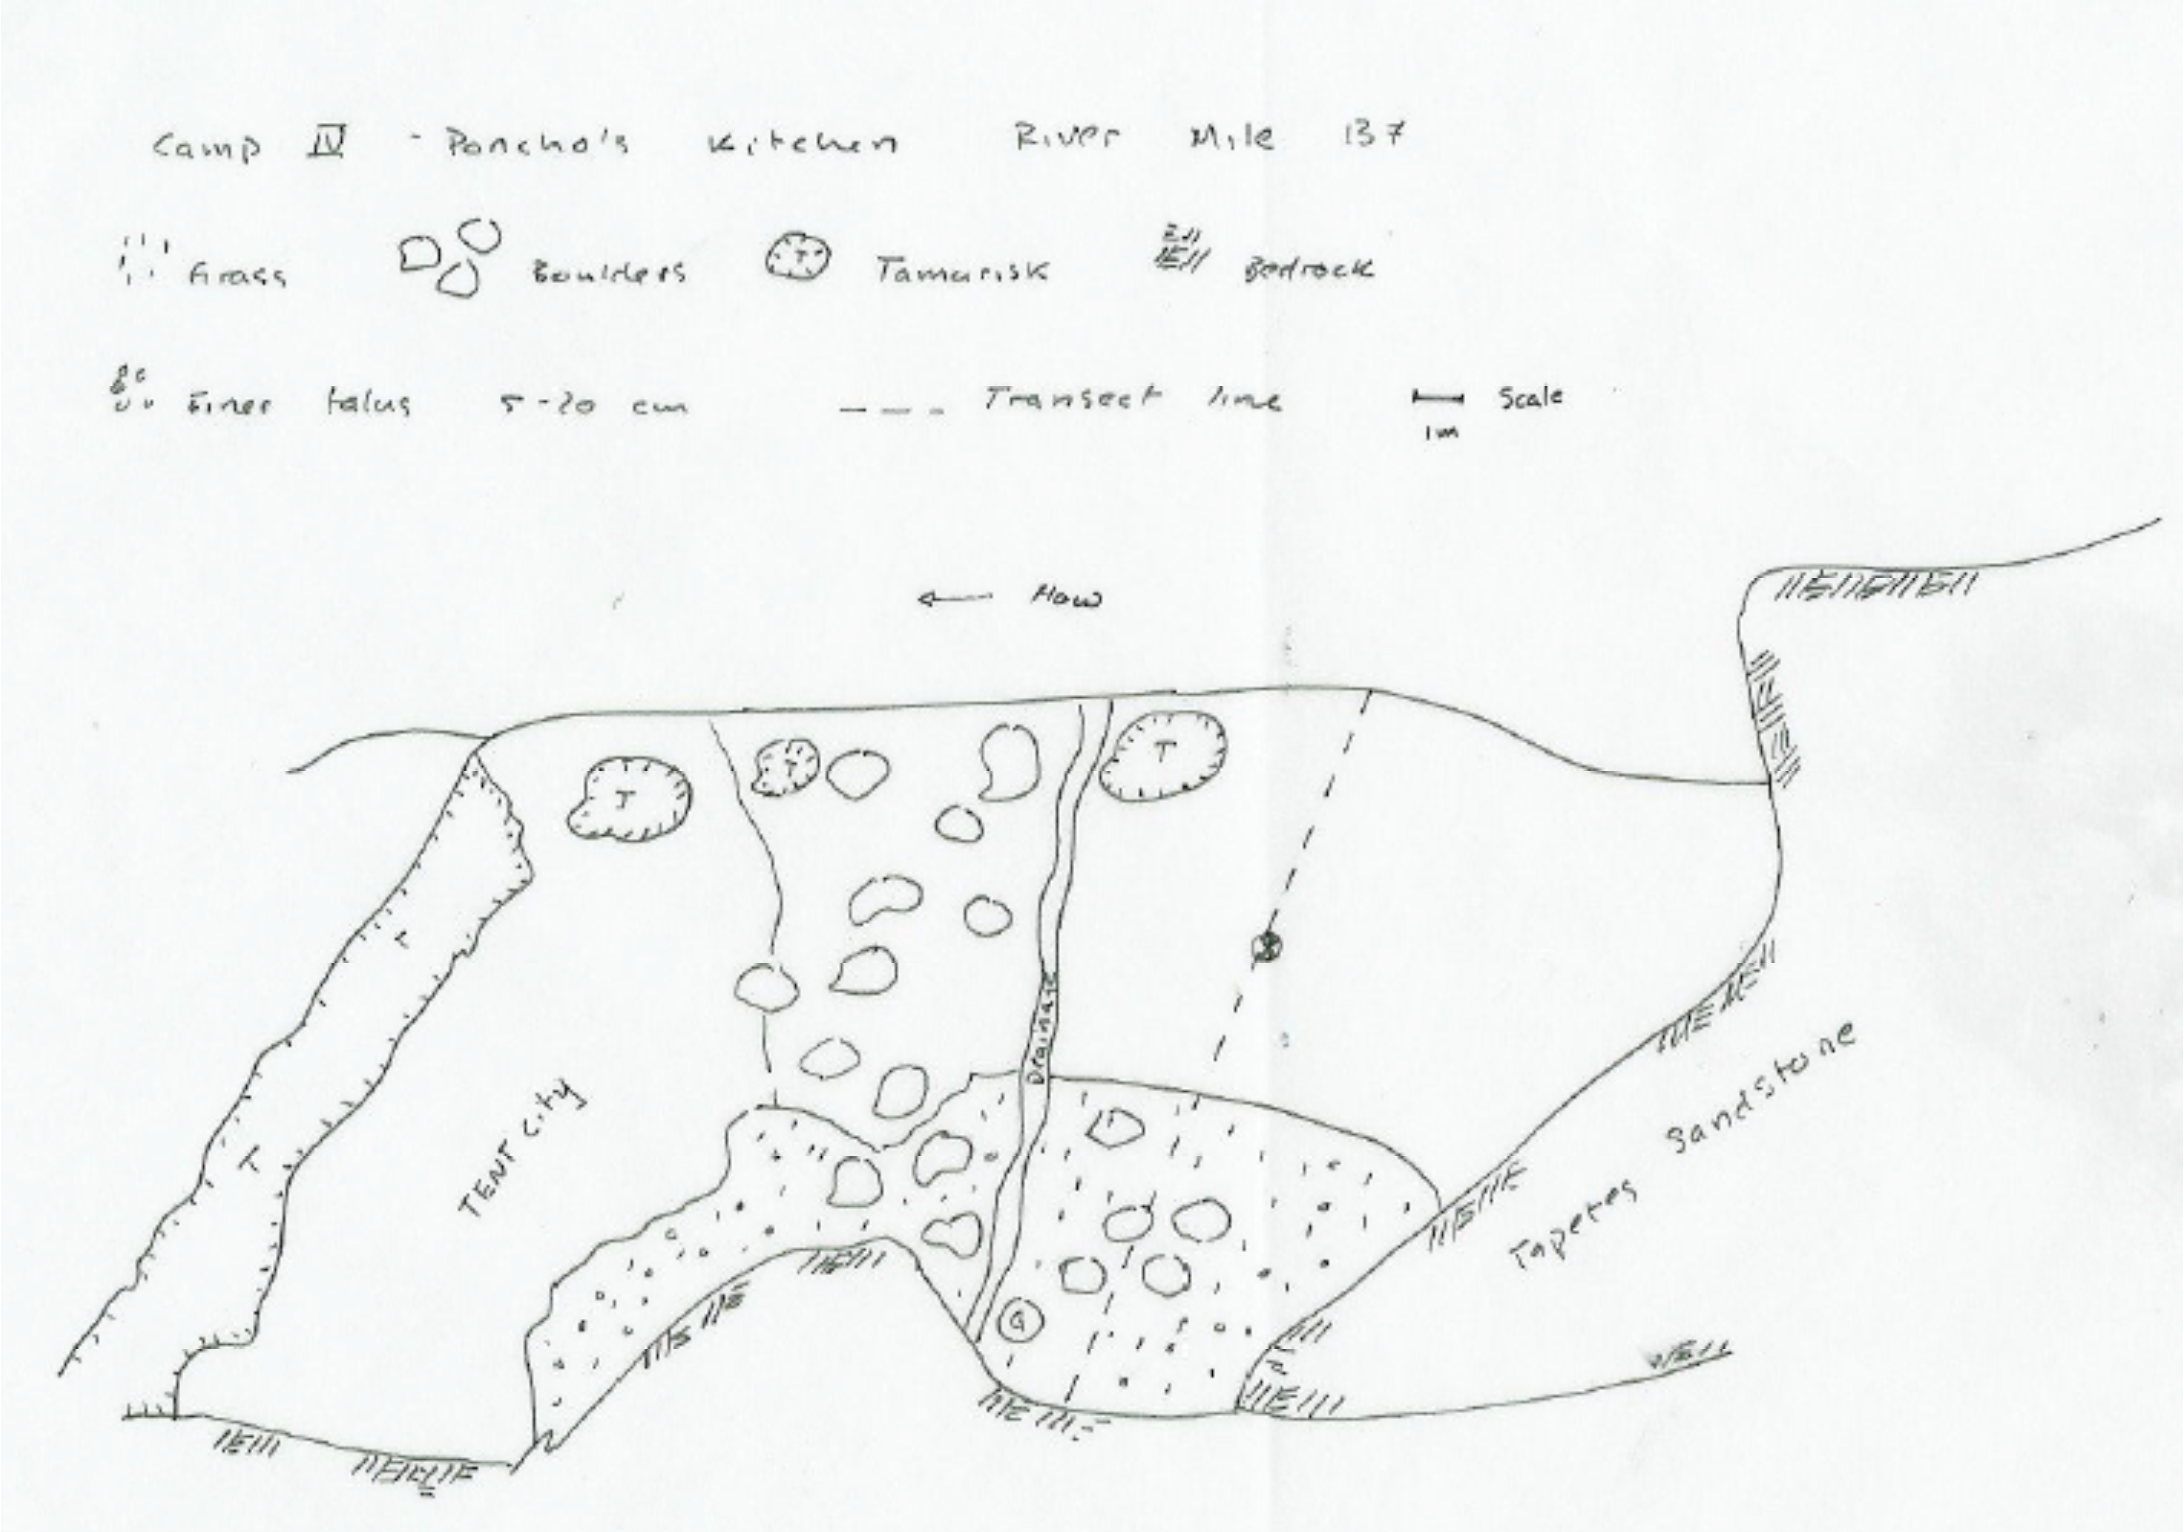 Figure 3 – Map of Camp IV